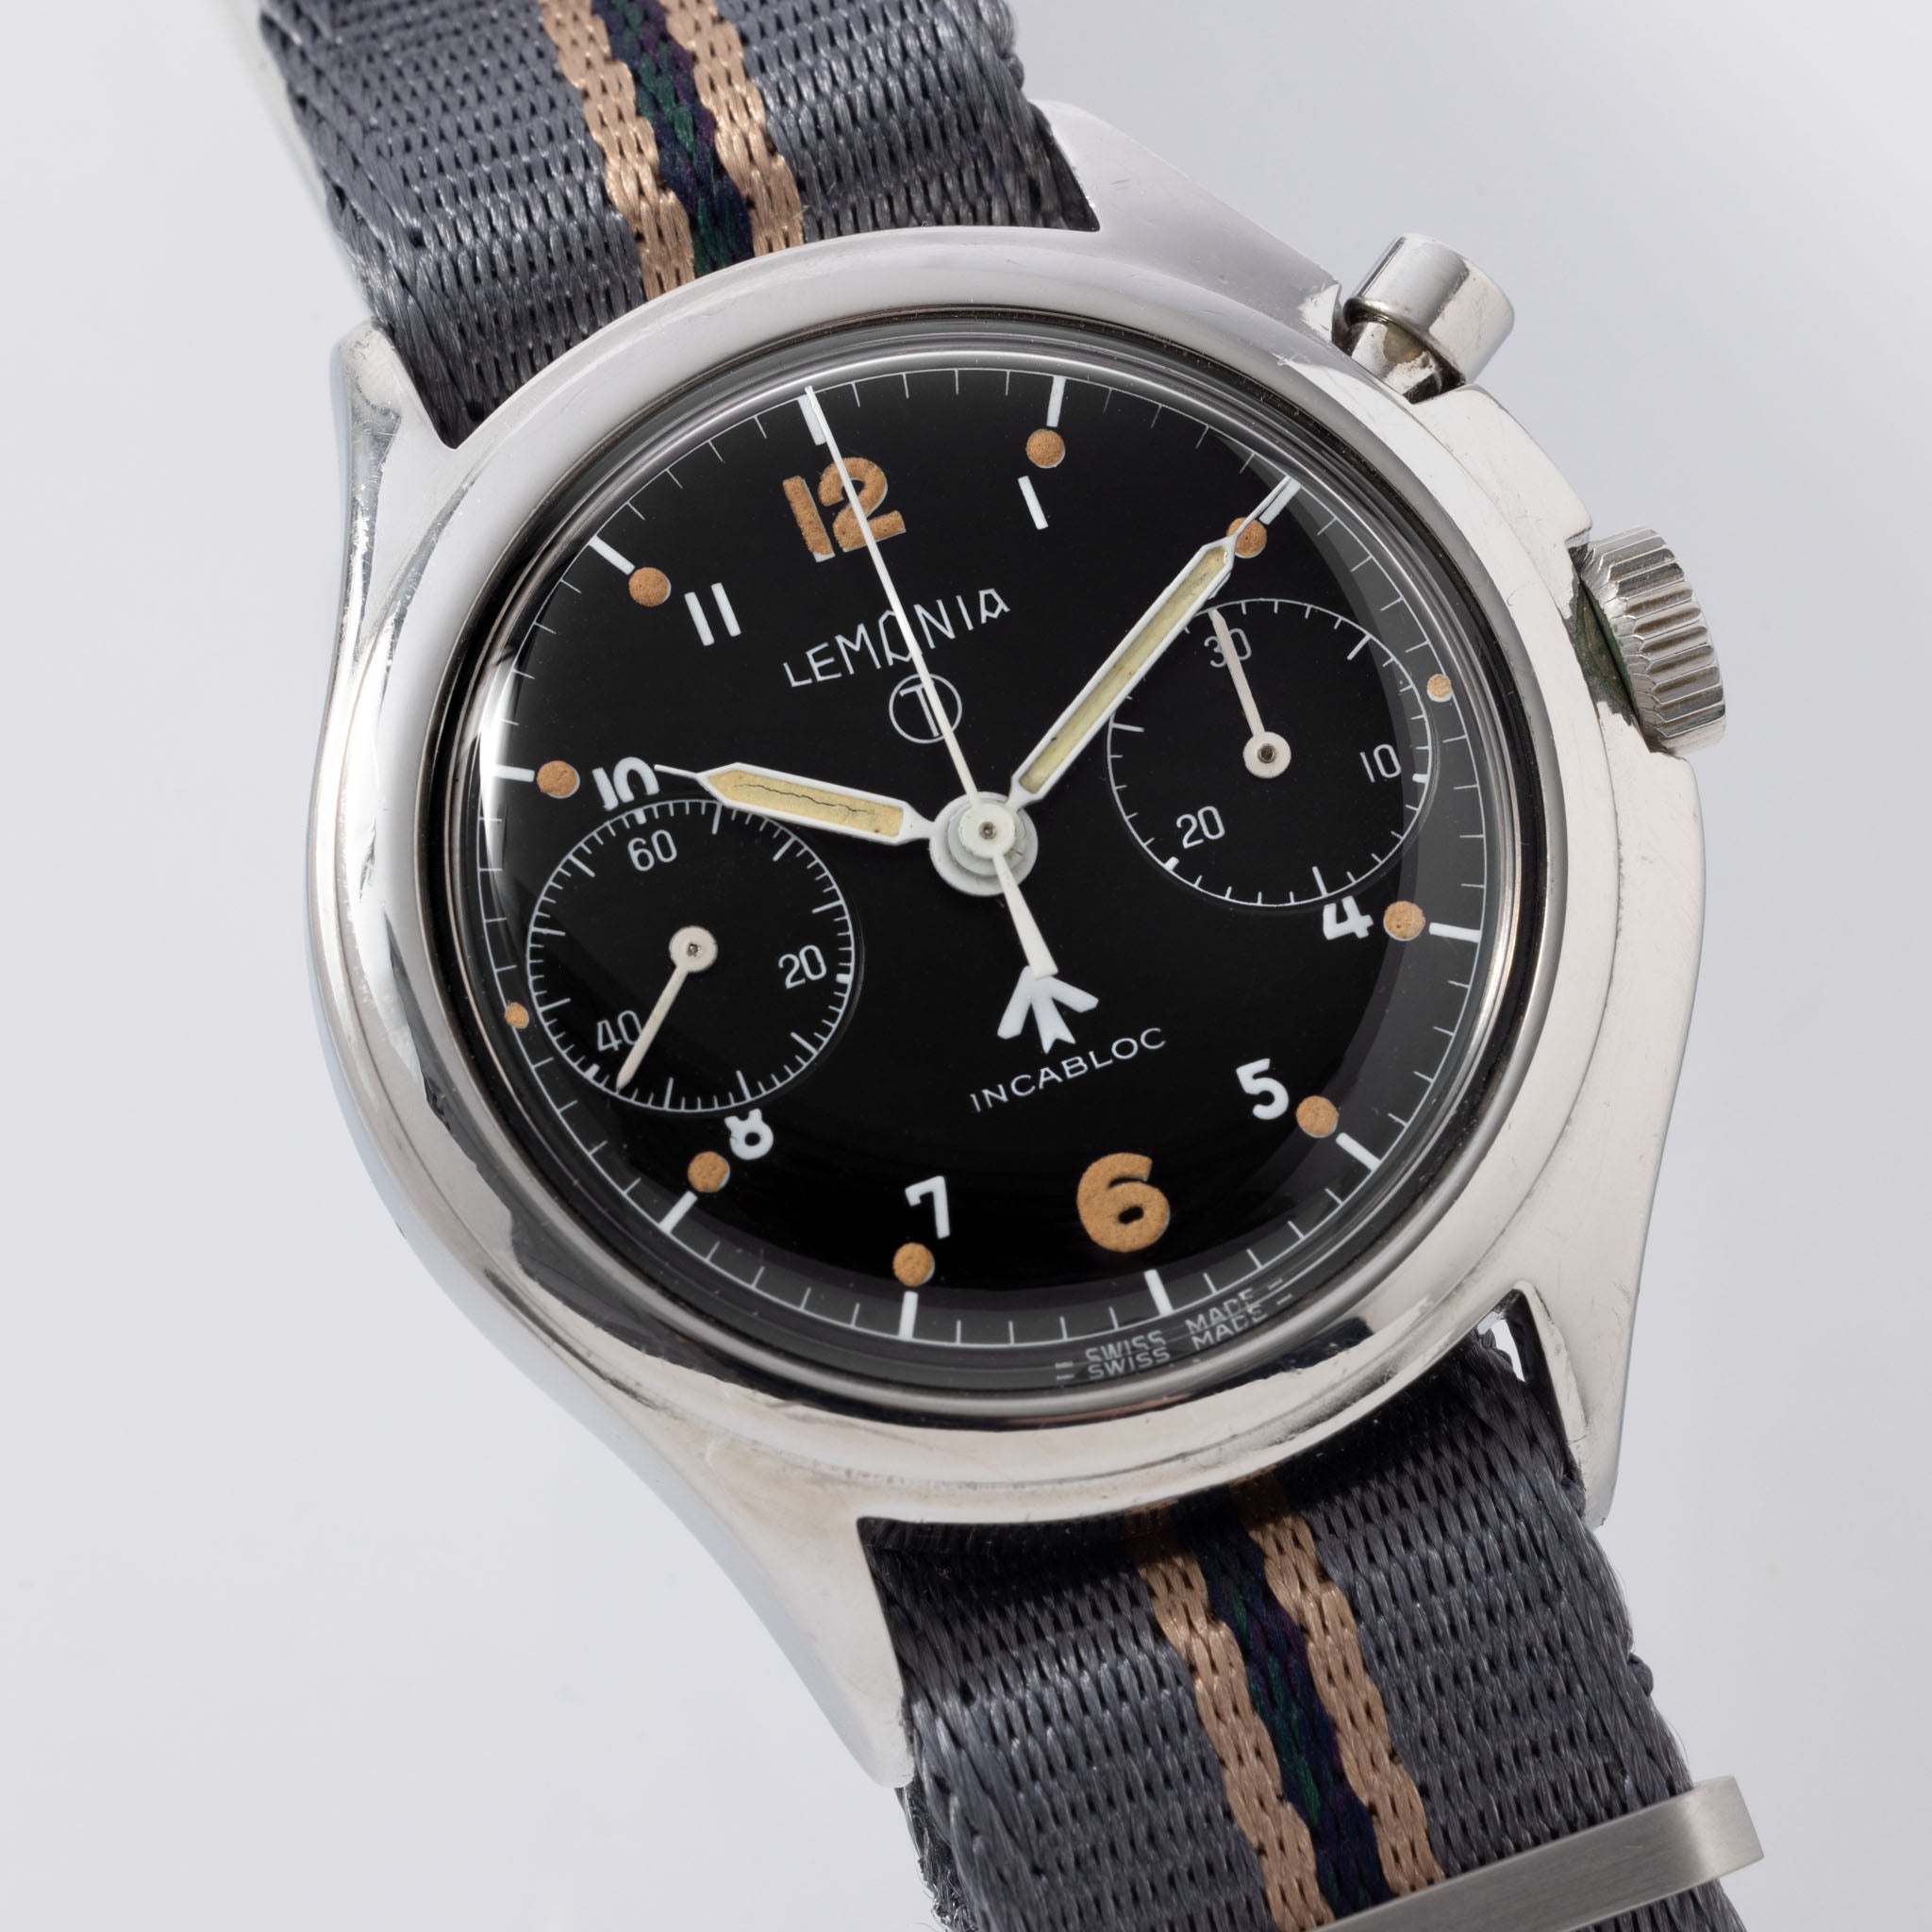 Lemania Monopusher Chronograph Issued to British Armed Forces 6bb  ‌